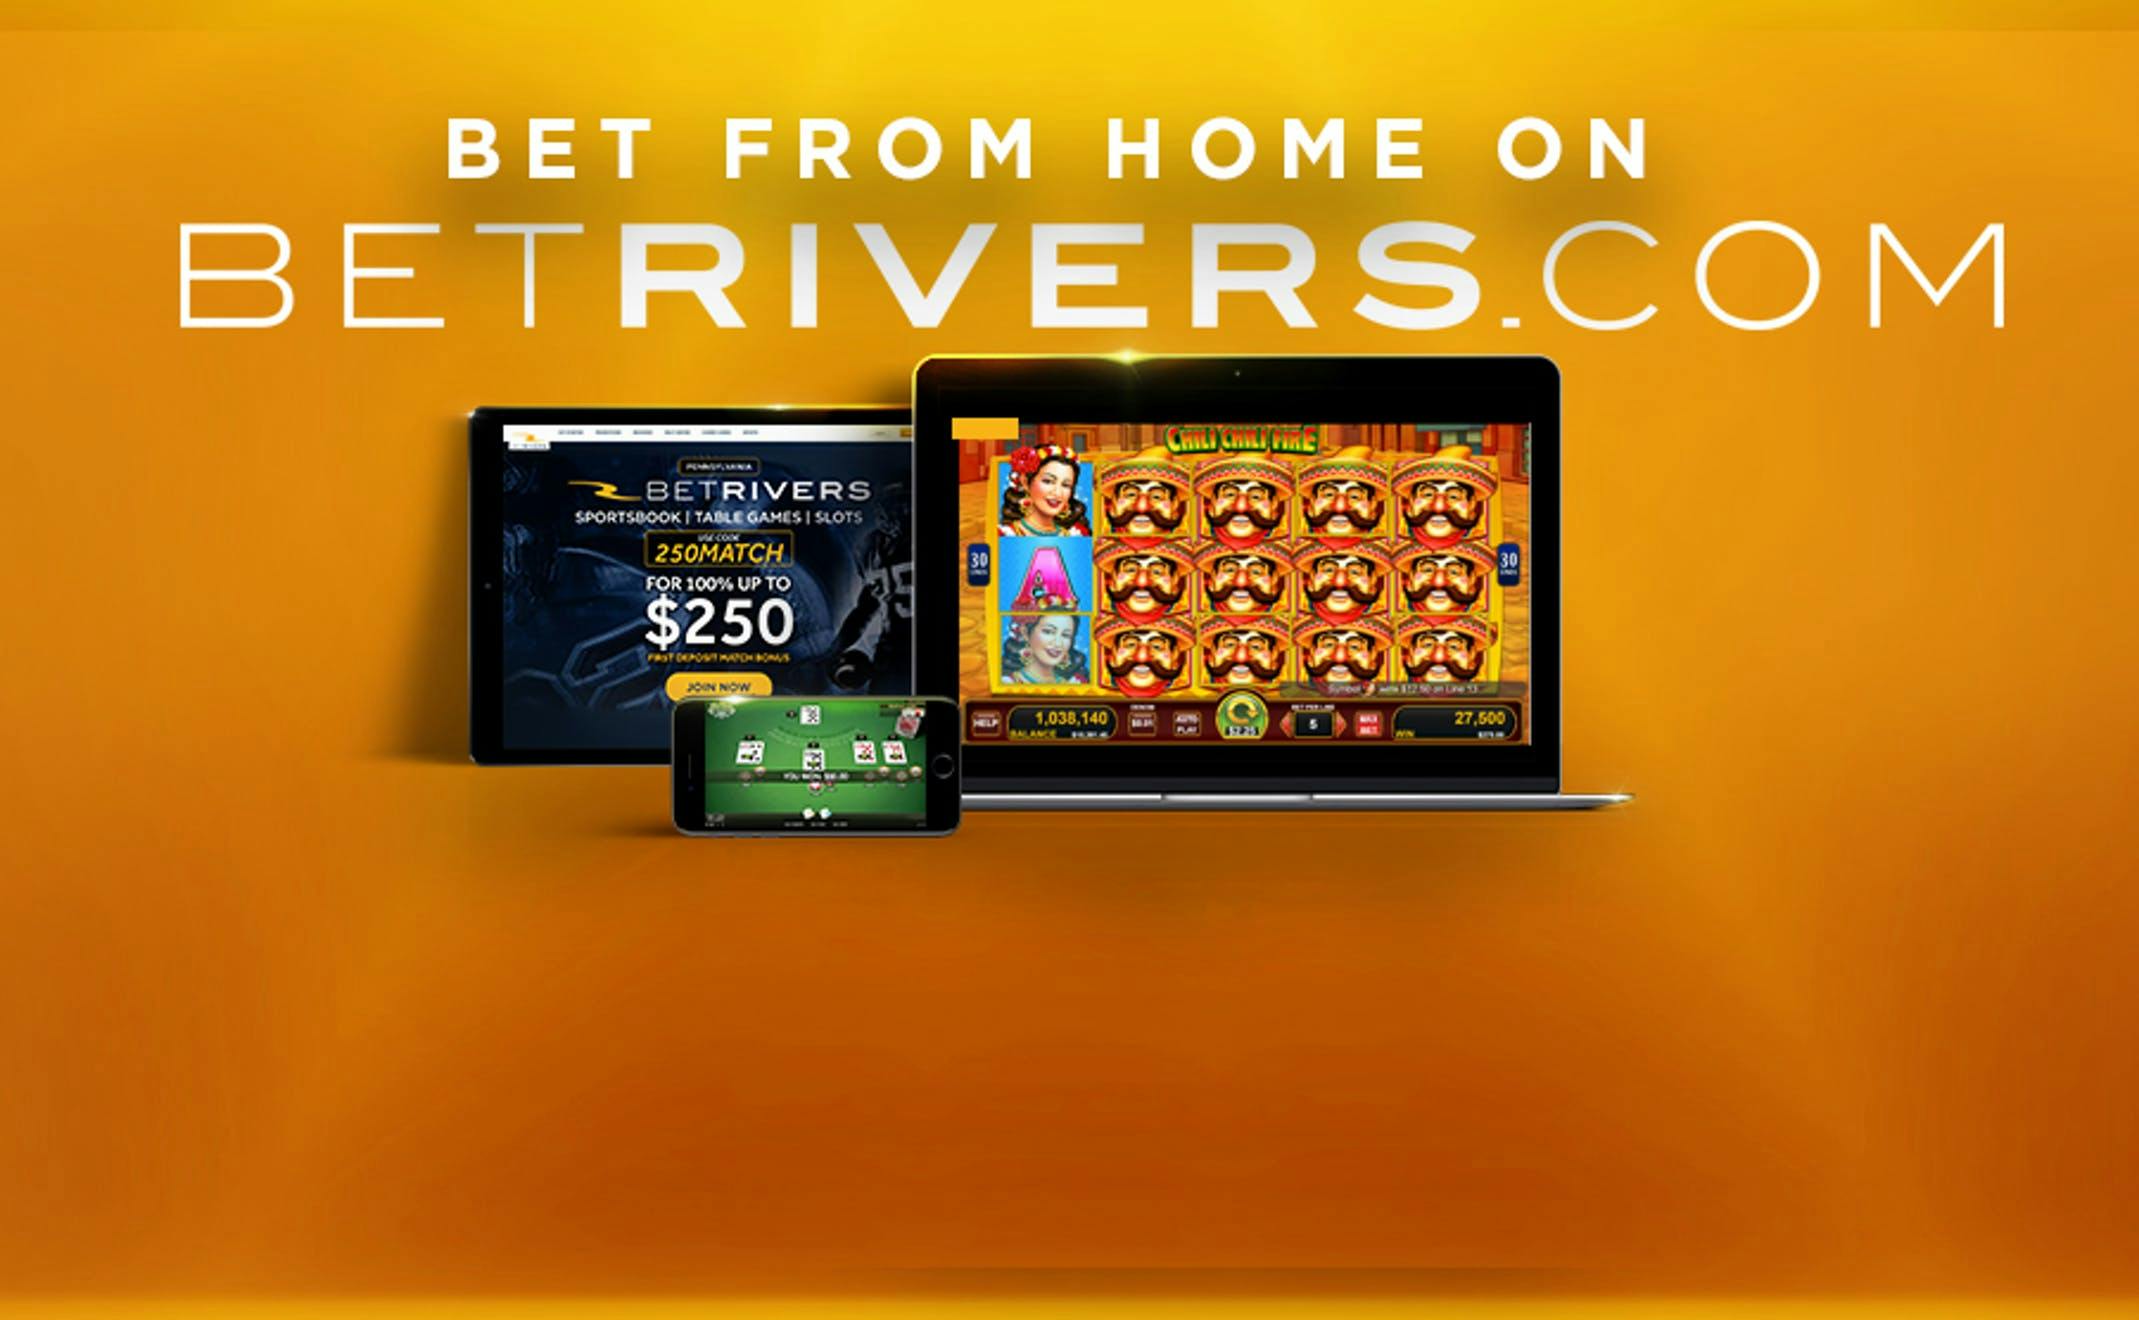 Play Now at BetRivers.com